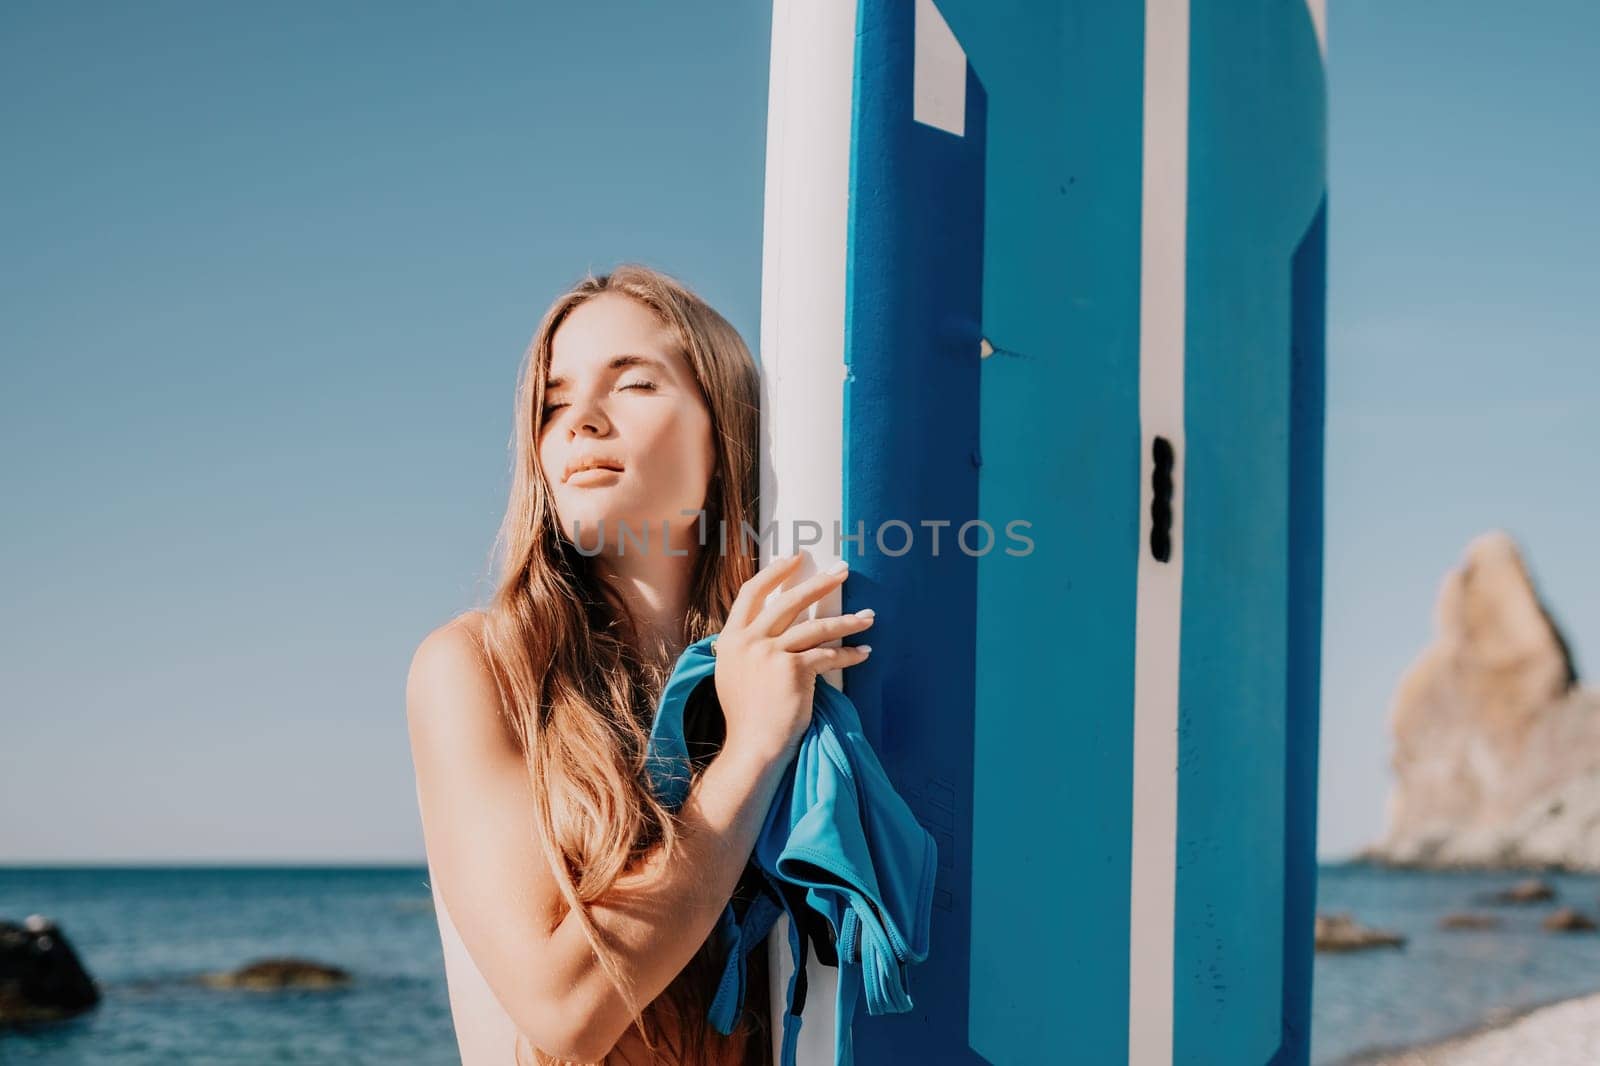 Close up shot of happy young caucasian woman looking at camera and smiling. Cute woman portrait in bikini posing on a volcanic rock high above the sea